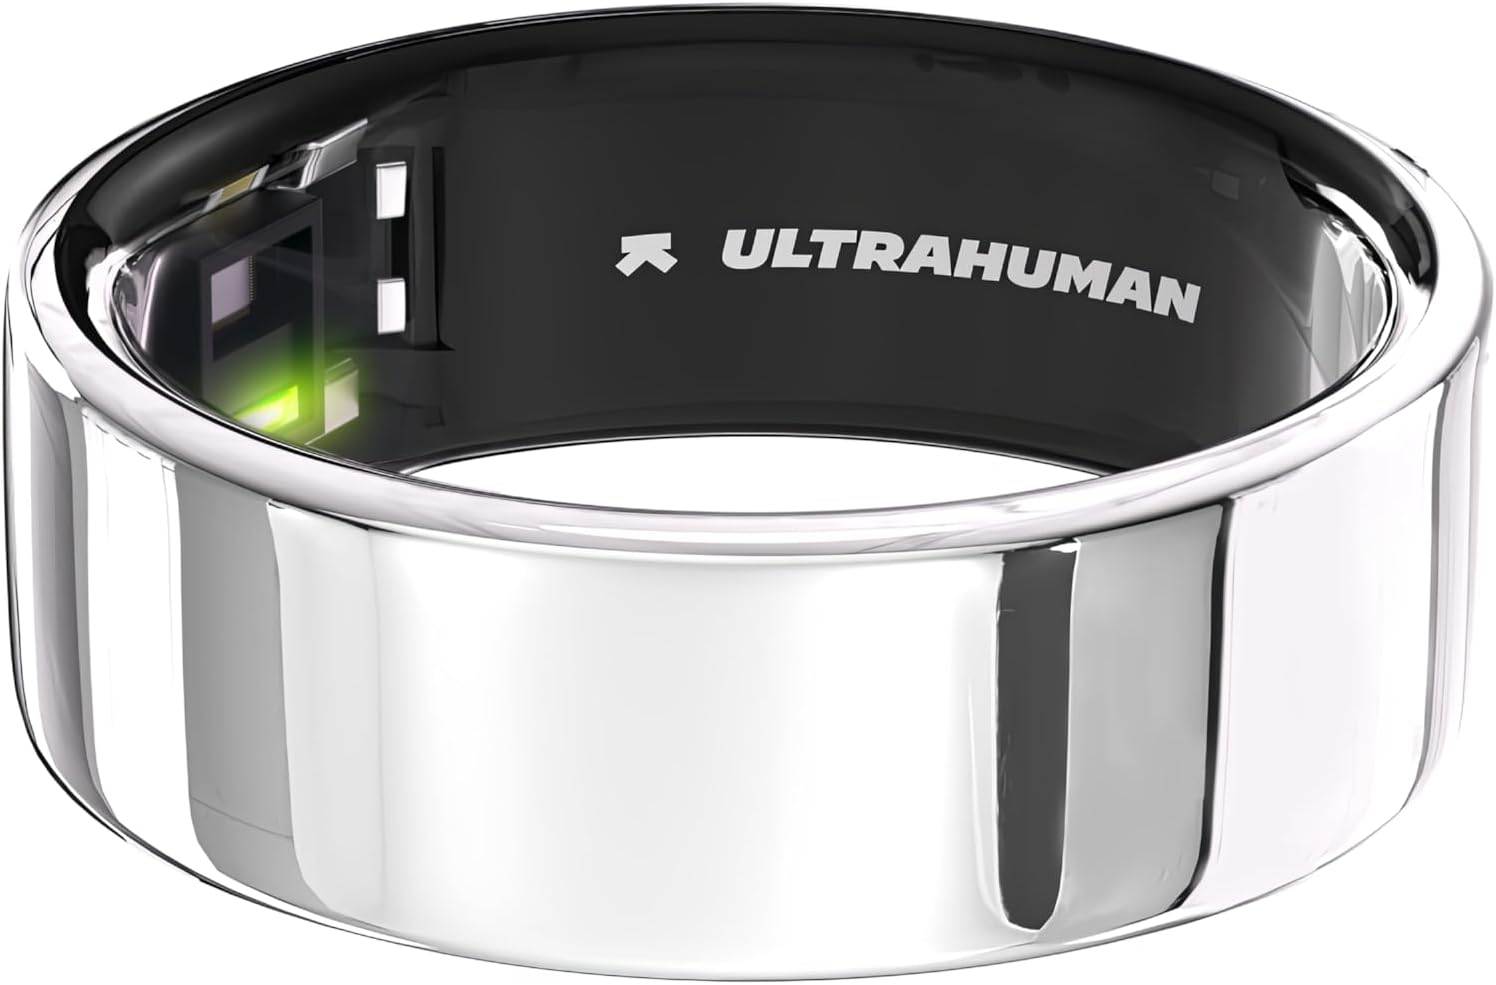 ULTRAHUMAN Ring: The amazing and Epic Wearable